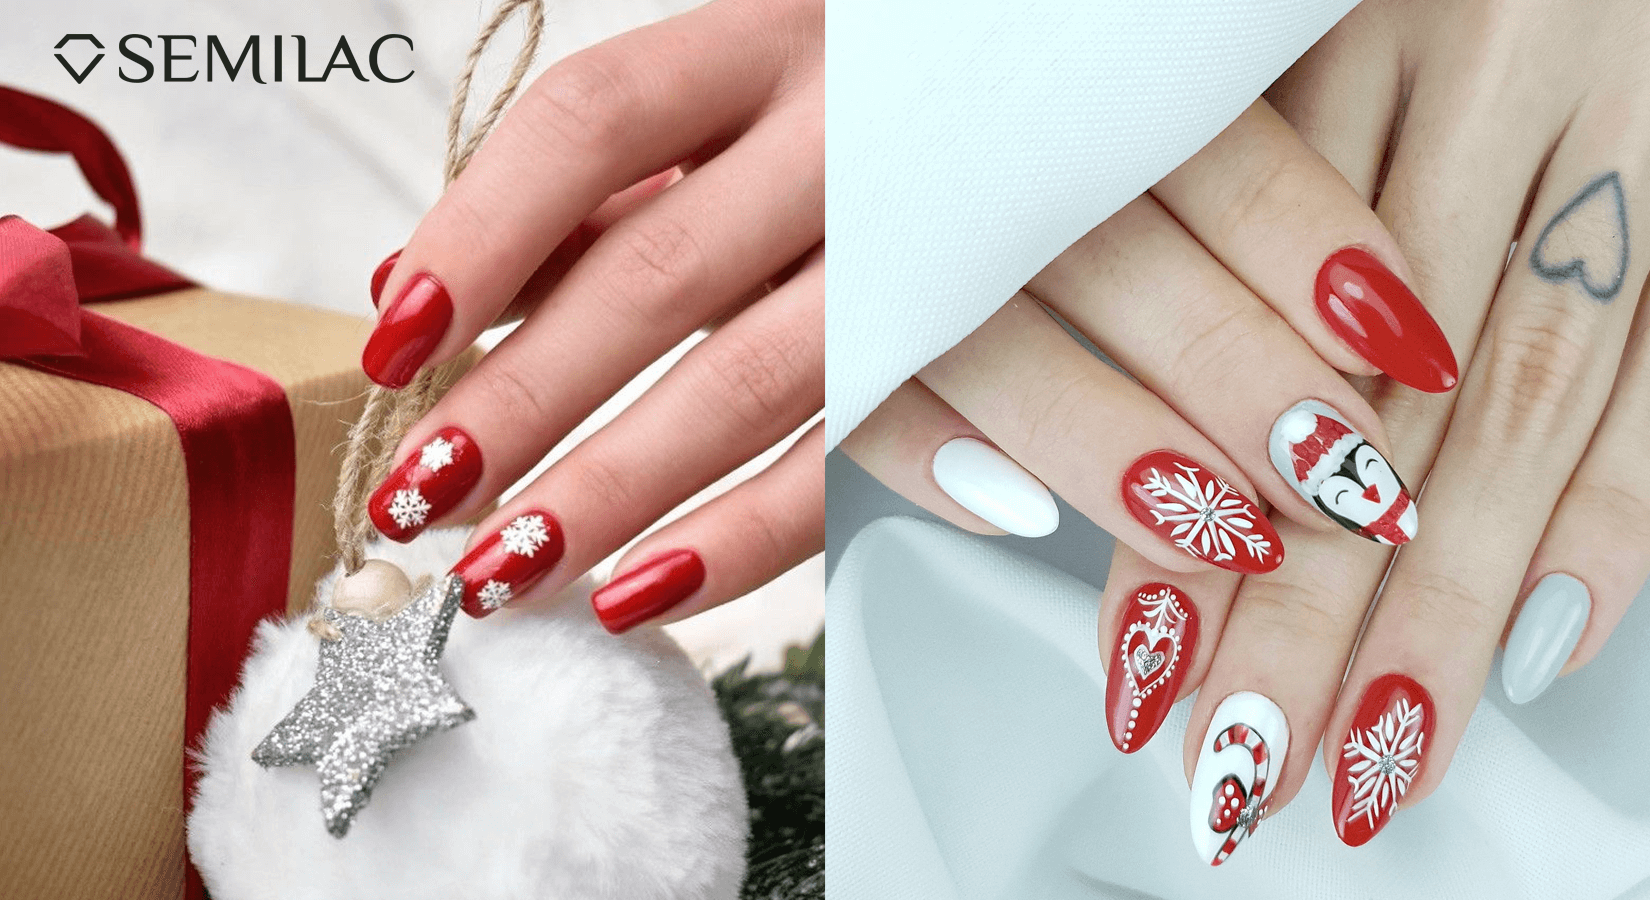 Dazzle Your Nails with Festive Magic: Semilac Christmas Nail Art Decorations